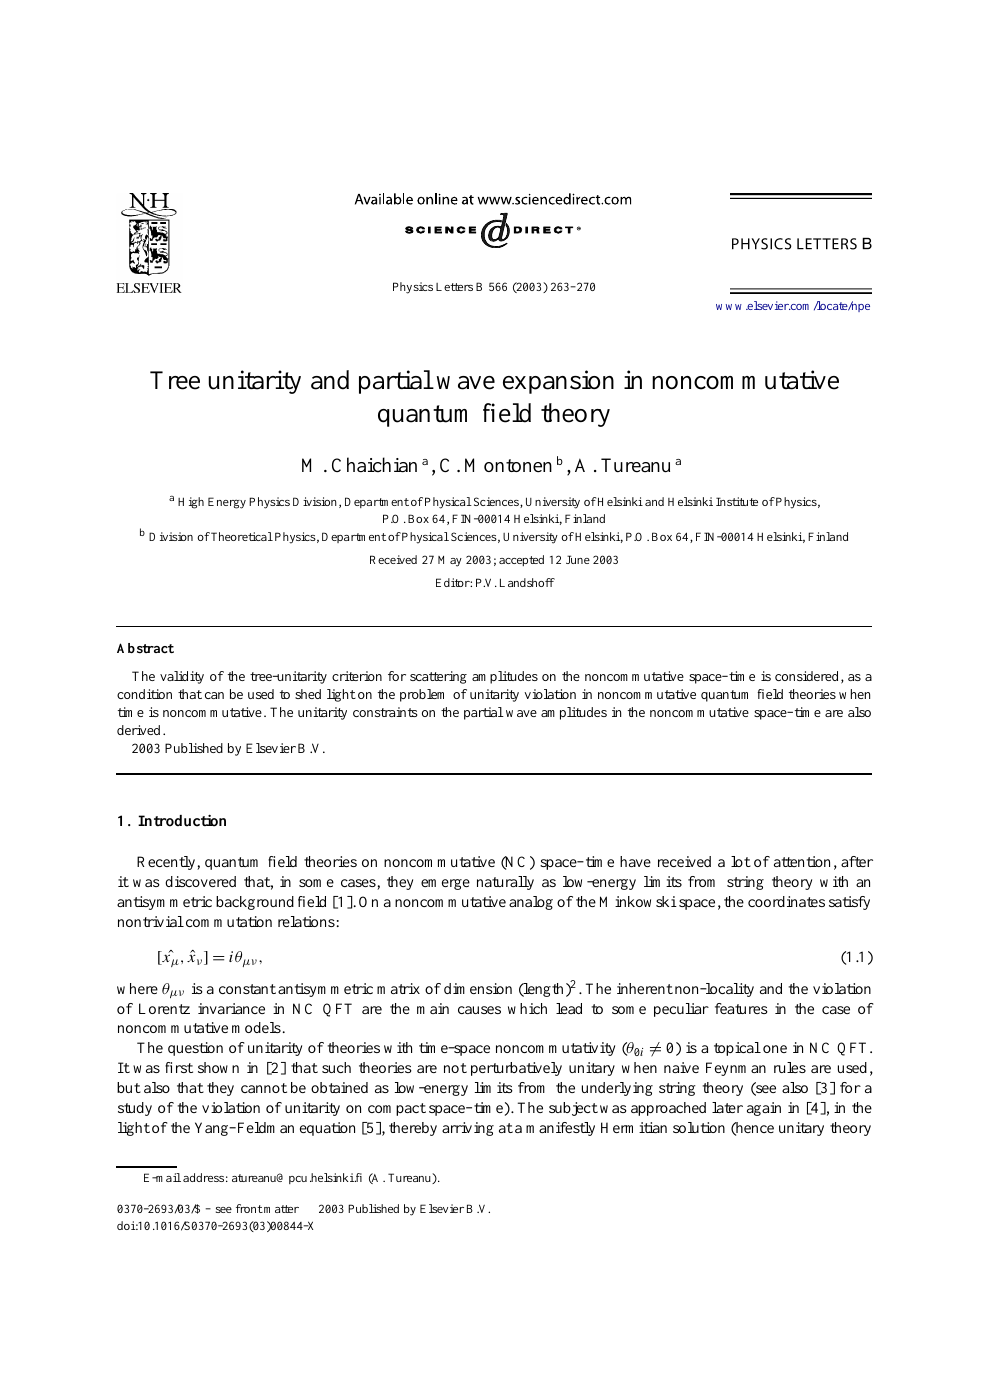 Tree Unitarity And Partial Wave Expansion In Noncommutative Quantum Field Theory Topic Of Research Paper In Physical Sciences Download Scholarly Article Pdf And Read For Free On Cyberleninka Open Science Hub